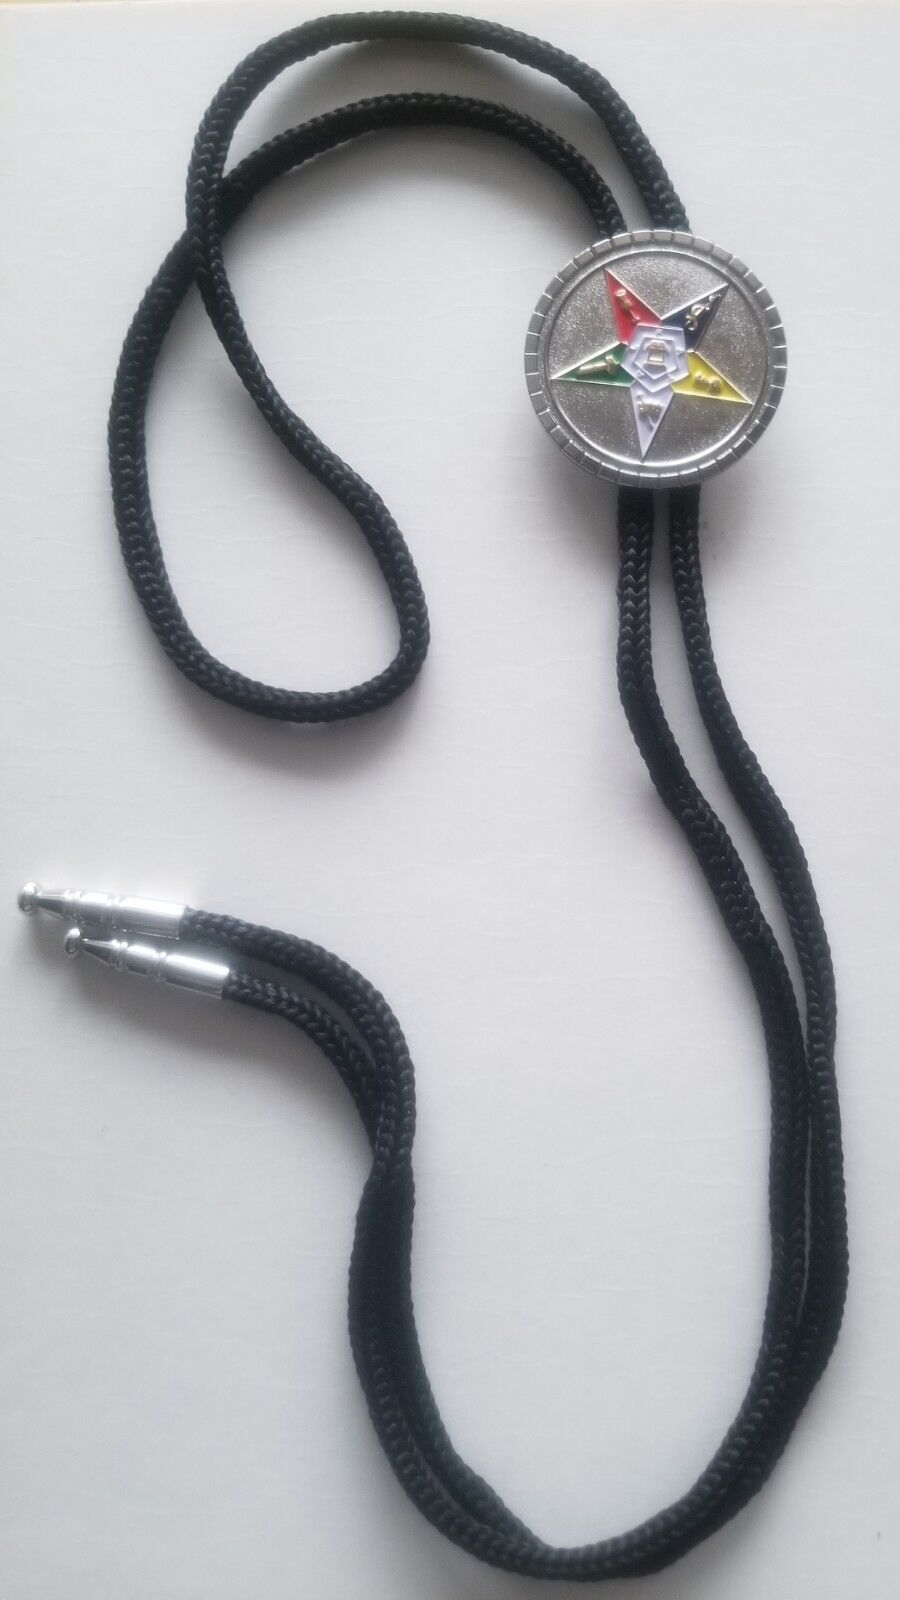 BOLO TIE ORDER OF EASTERN STAR OES 